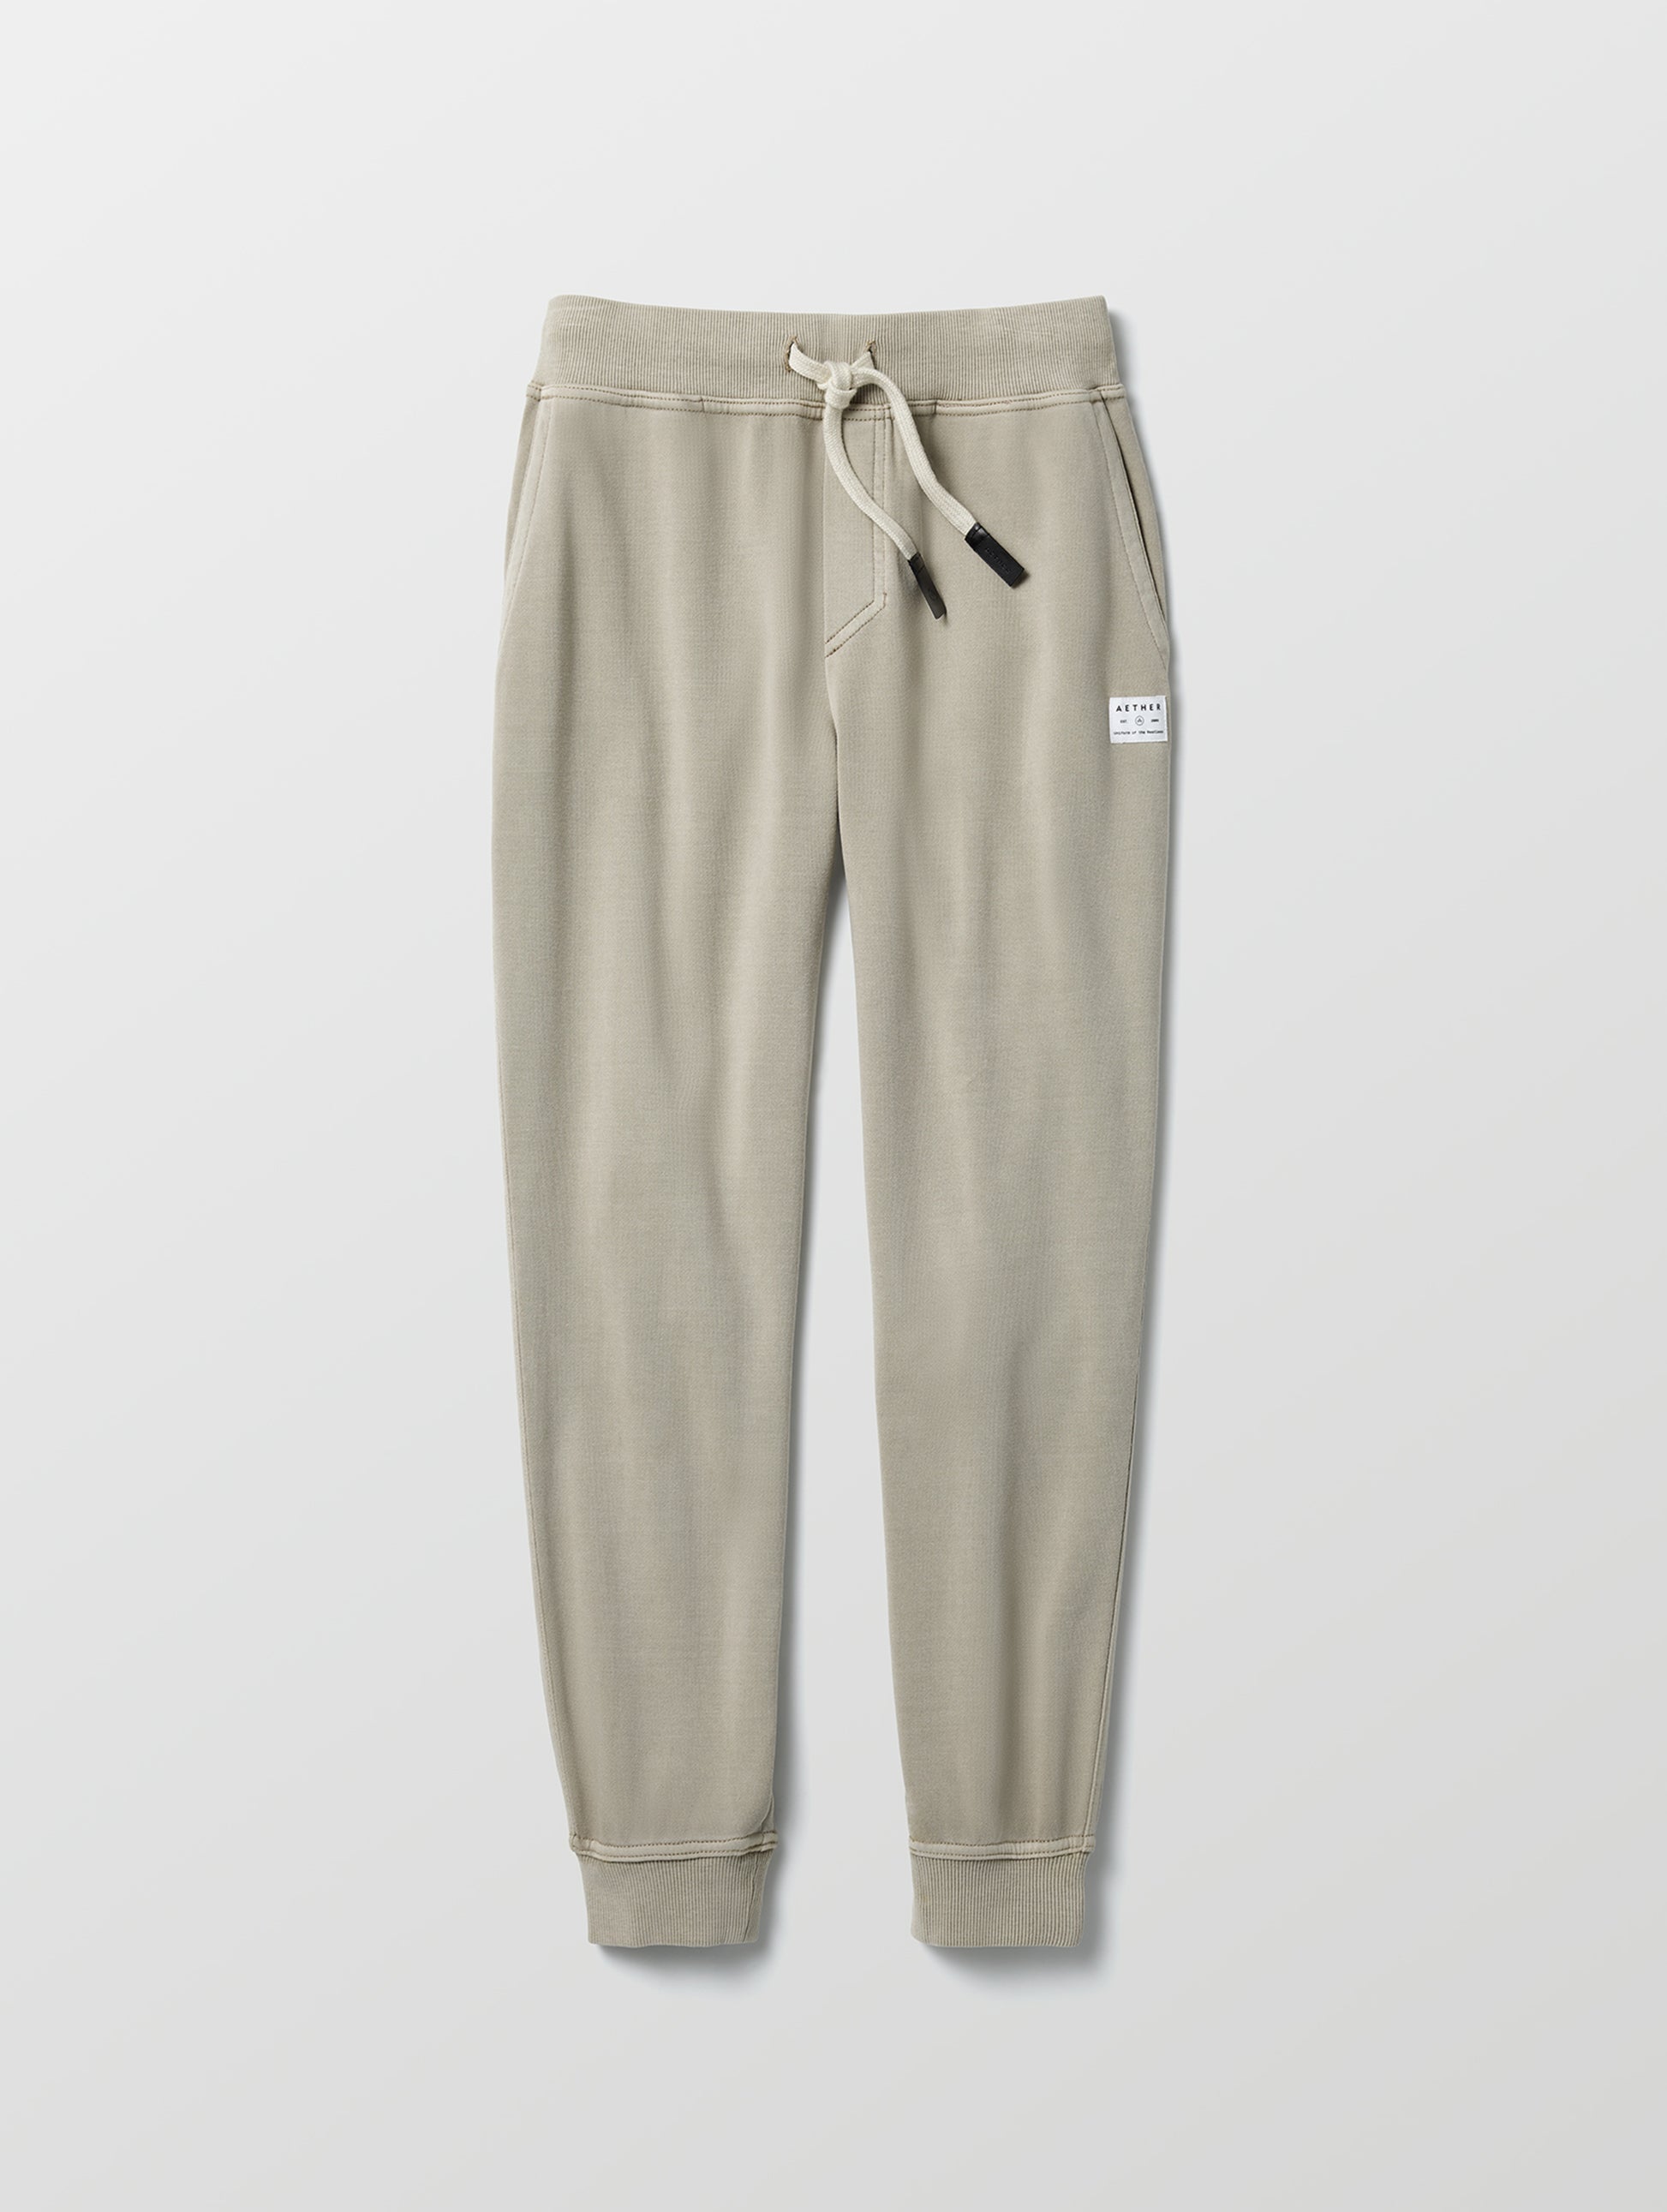 light grey jogger for women from AETHER Apparel